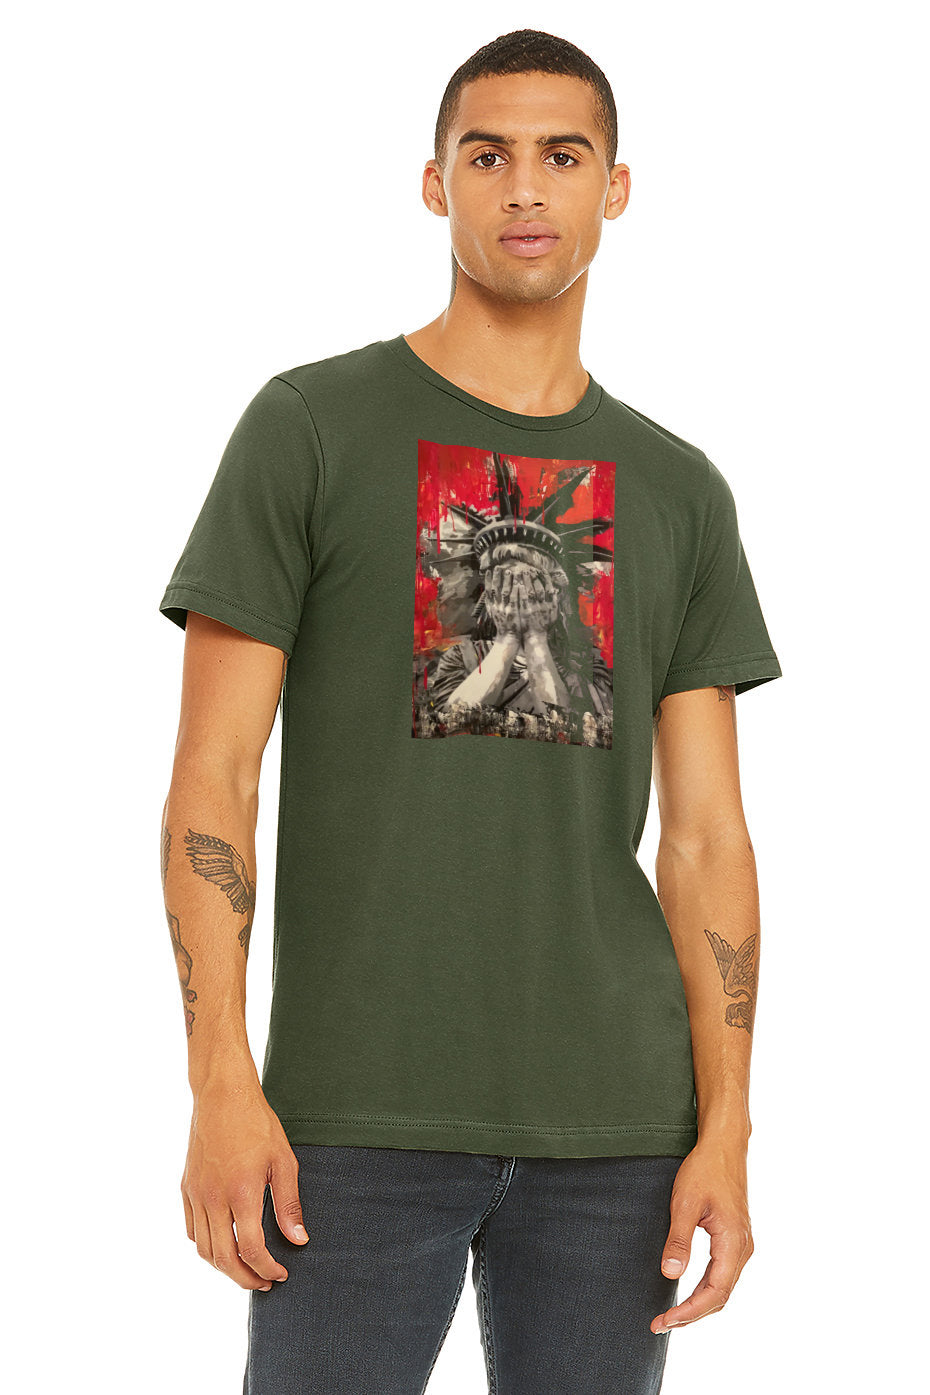 Lost Lady of Enlightenment T-shirt